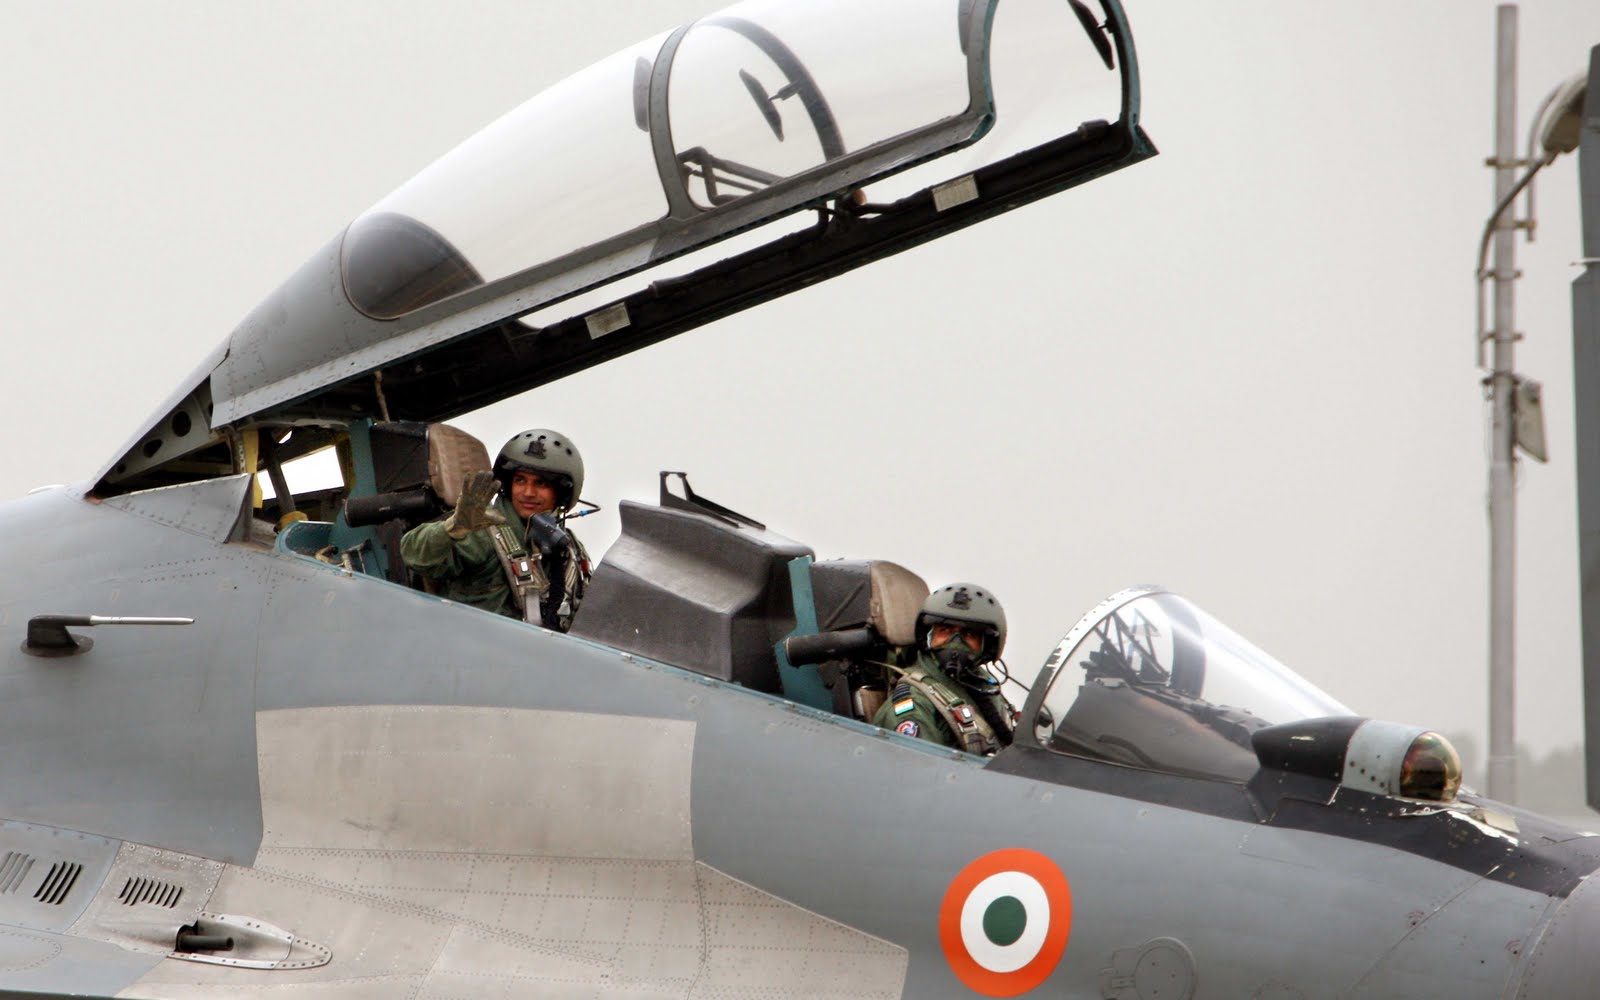 SU-30+PILOTS+WAVING+OFF+BEFORE+DEPARTING+BAREILLY+ON+07+JUNE+10+FOR+EXERCISE+GARUDA+SCHEDULED+IN+FRANCE+FROM+14-24+JUNE+2010-799968.JPG